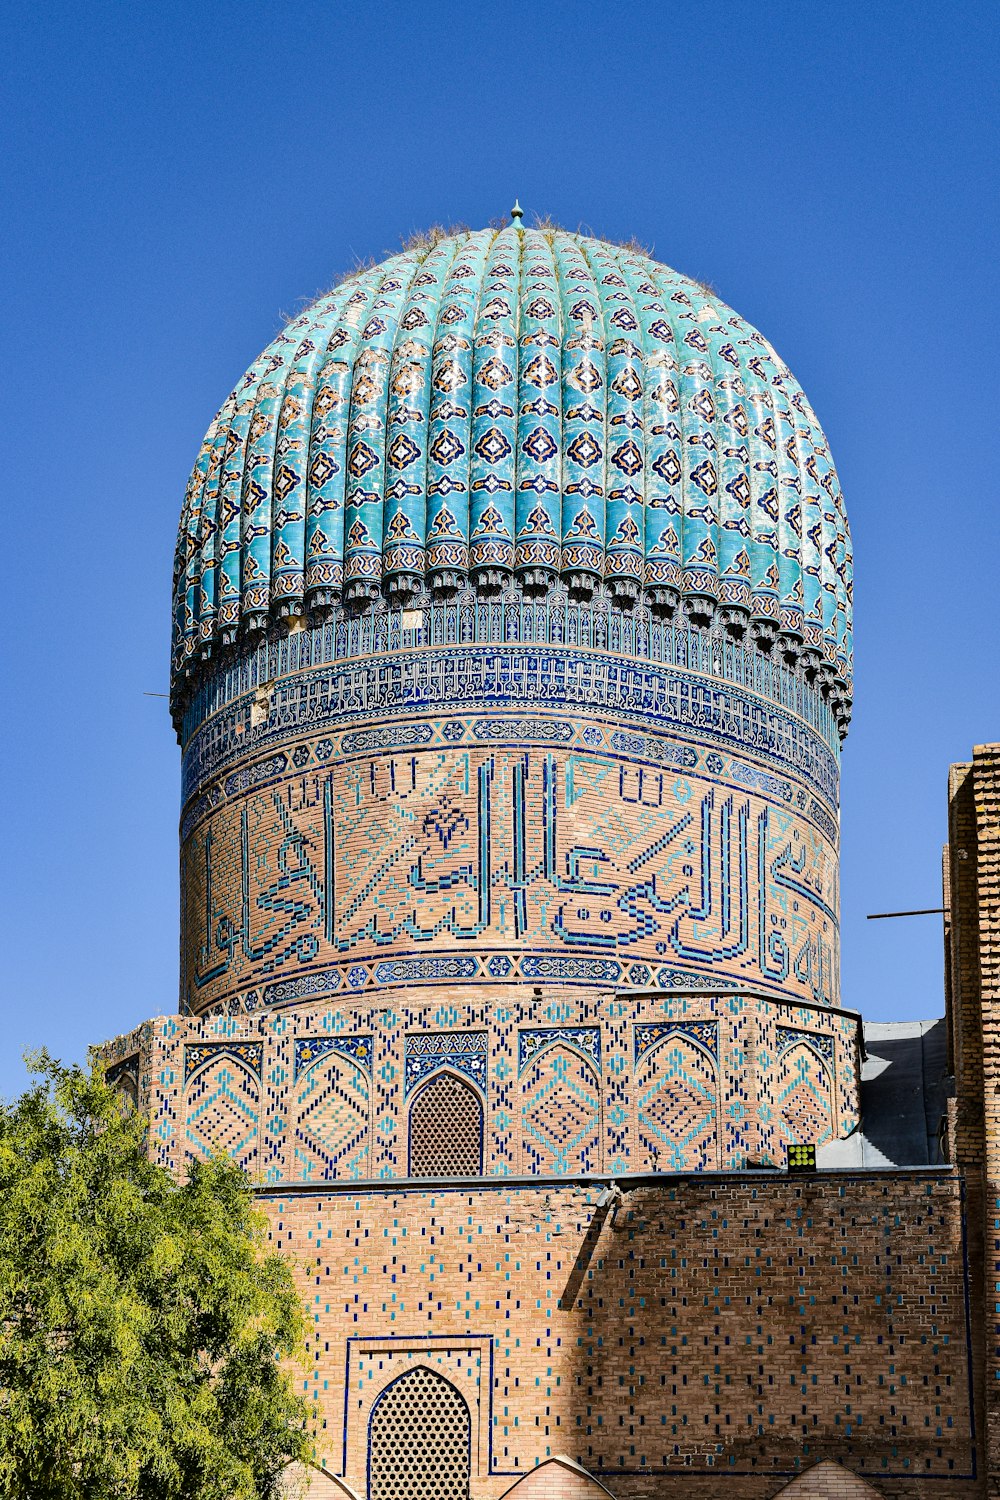 the dome of a building with a blue sky in the background